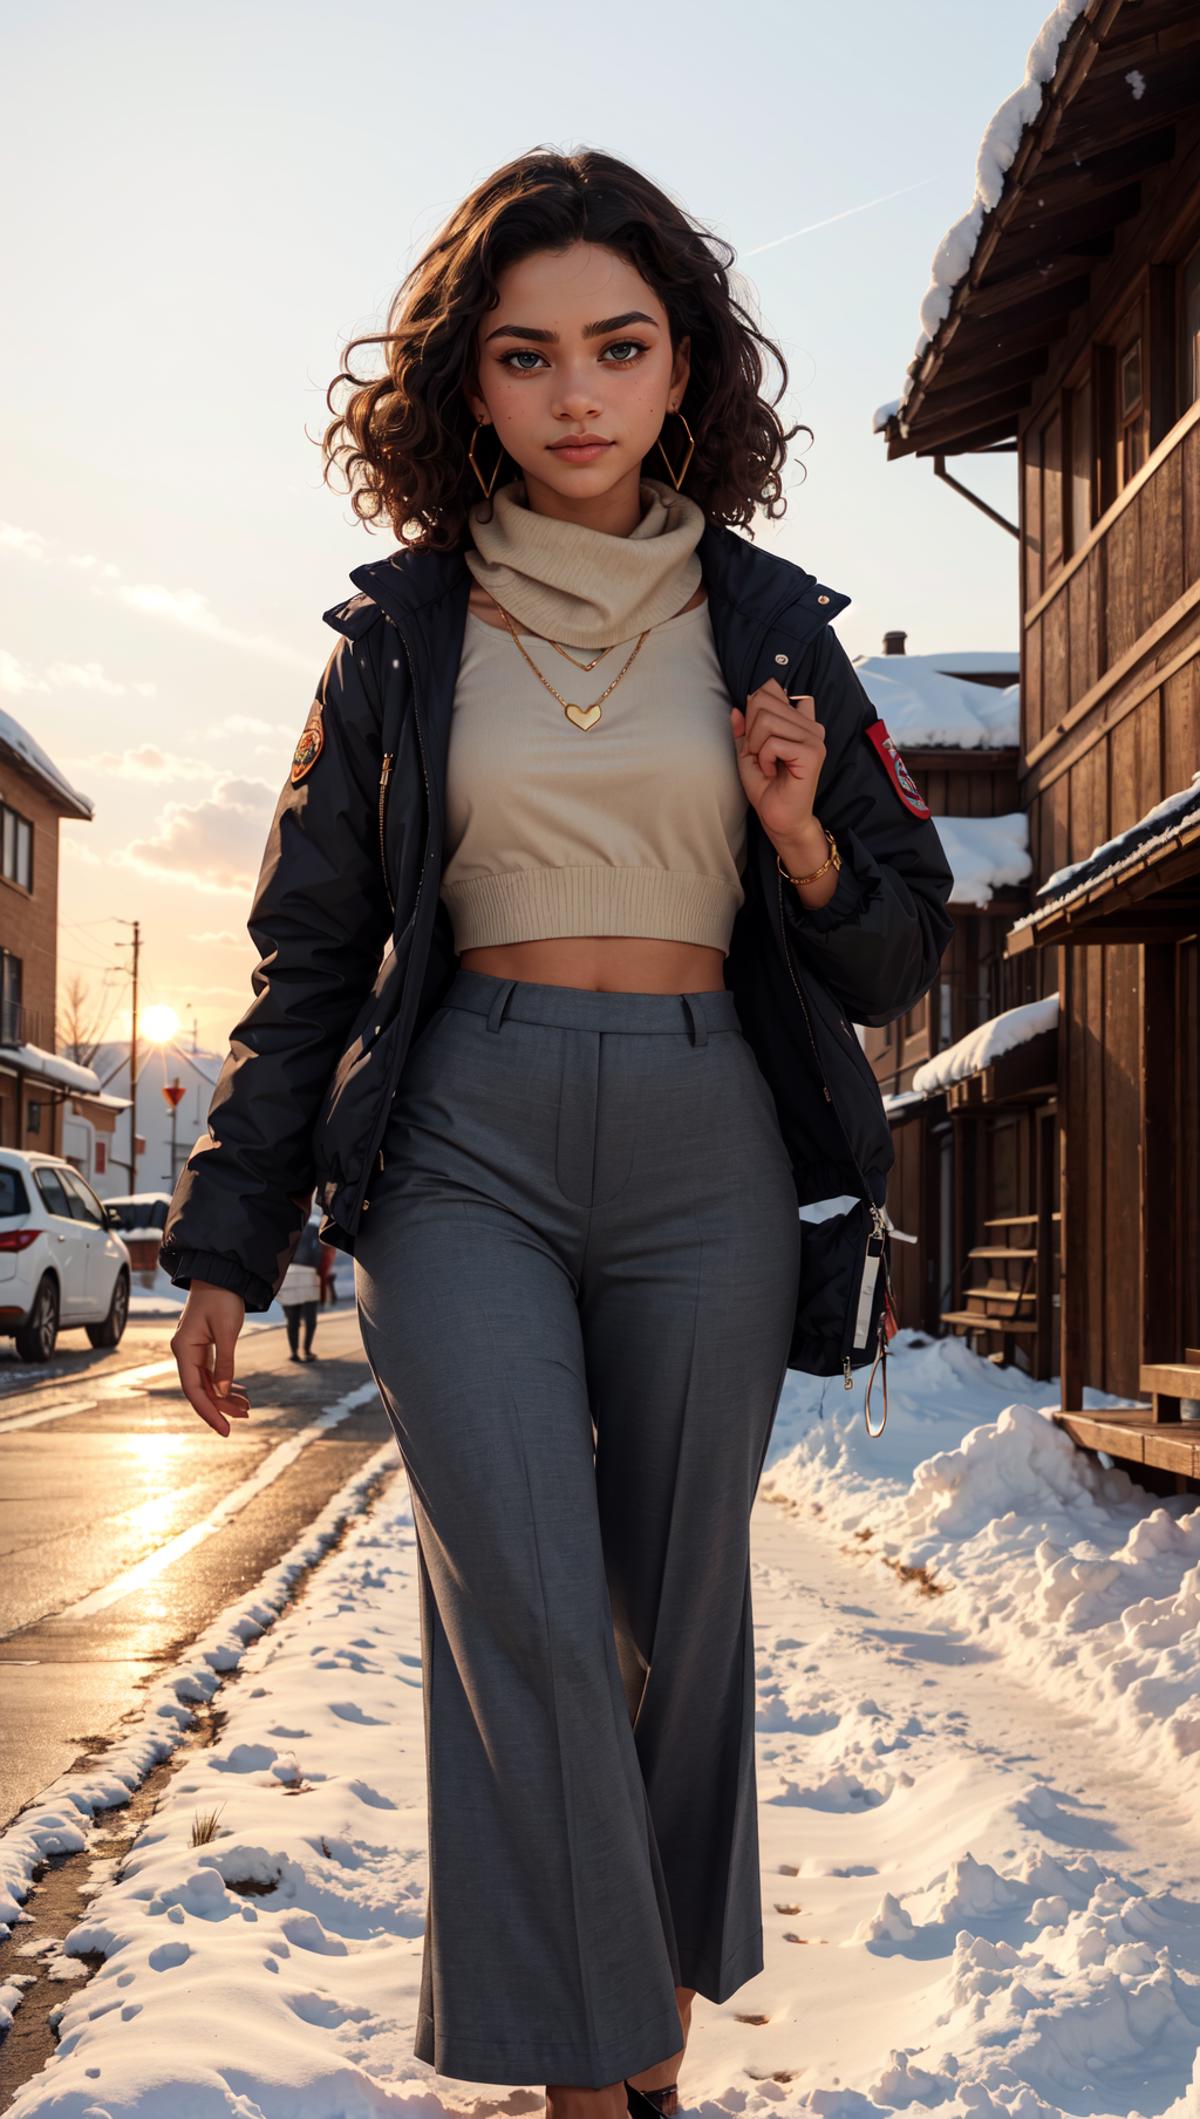 Woman Walking in Snow with Tan Sweater, Jeans, and Gold Chain Necklace